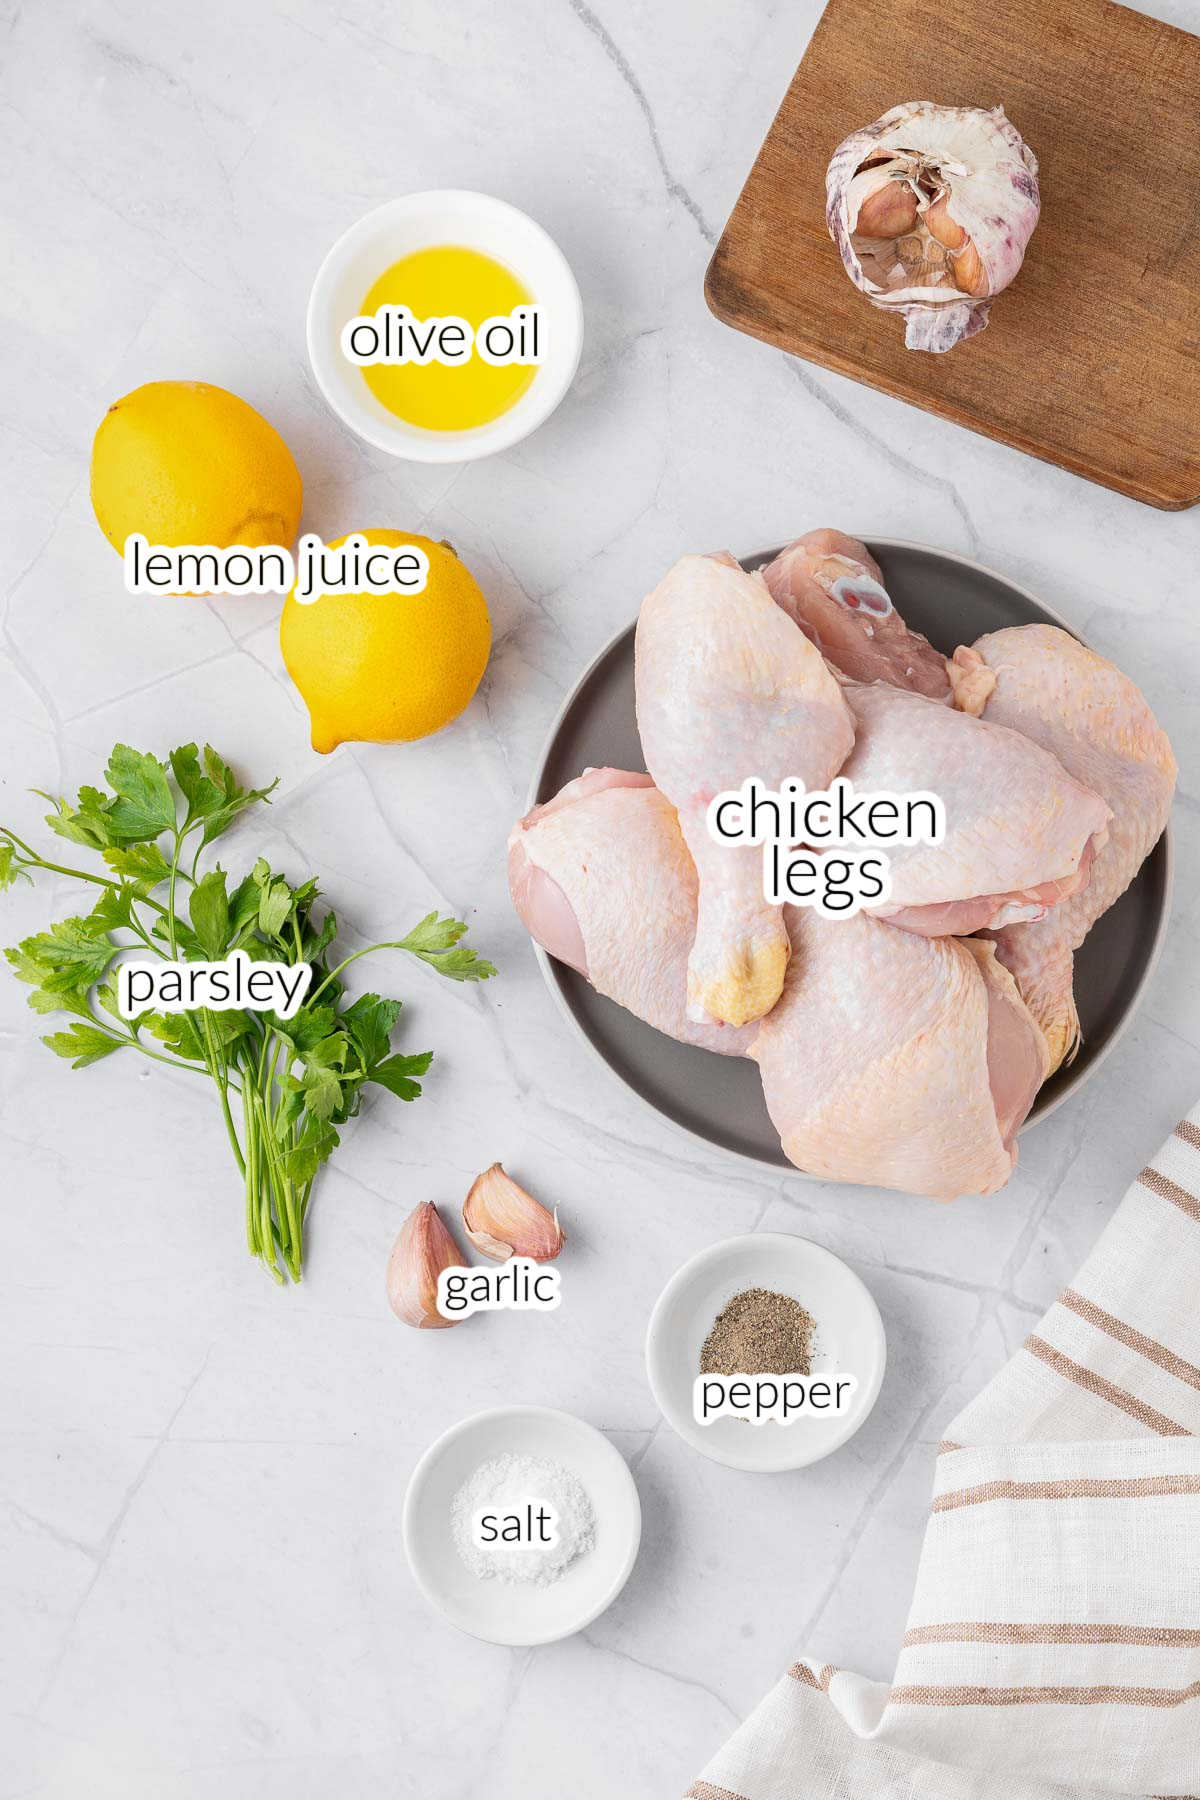 Ingredients for an air fryer chicken legs recipe on a marble counter - raw chicken drumsticks, lemons, garlic, parsley, olive oil salt and pepper.